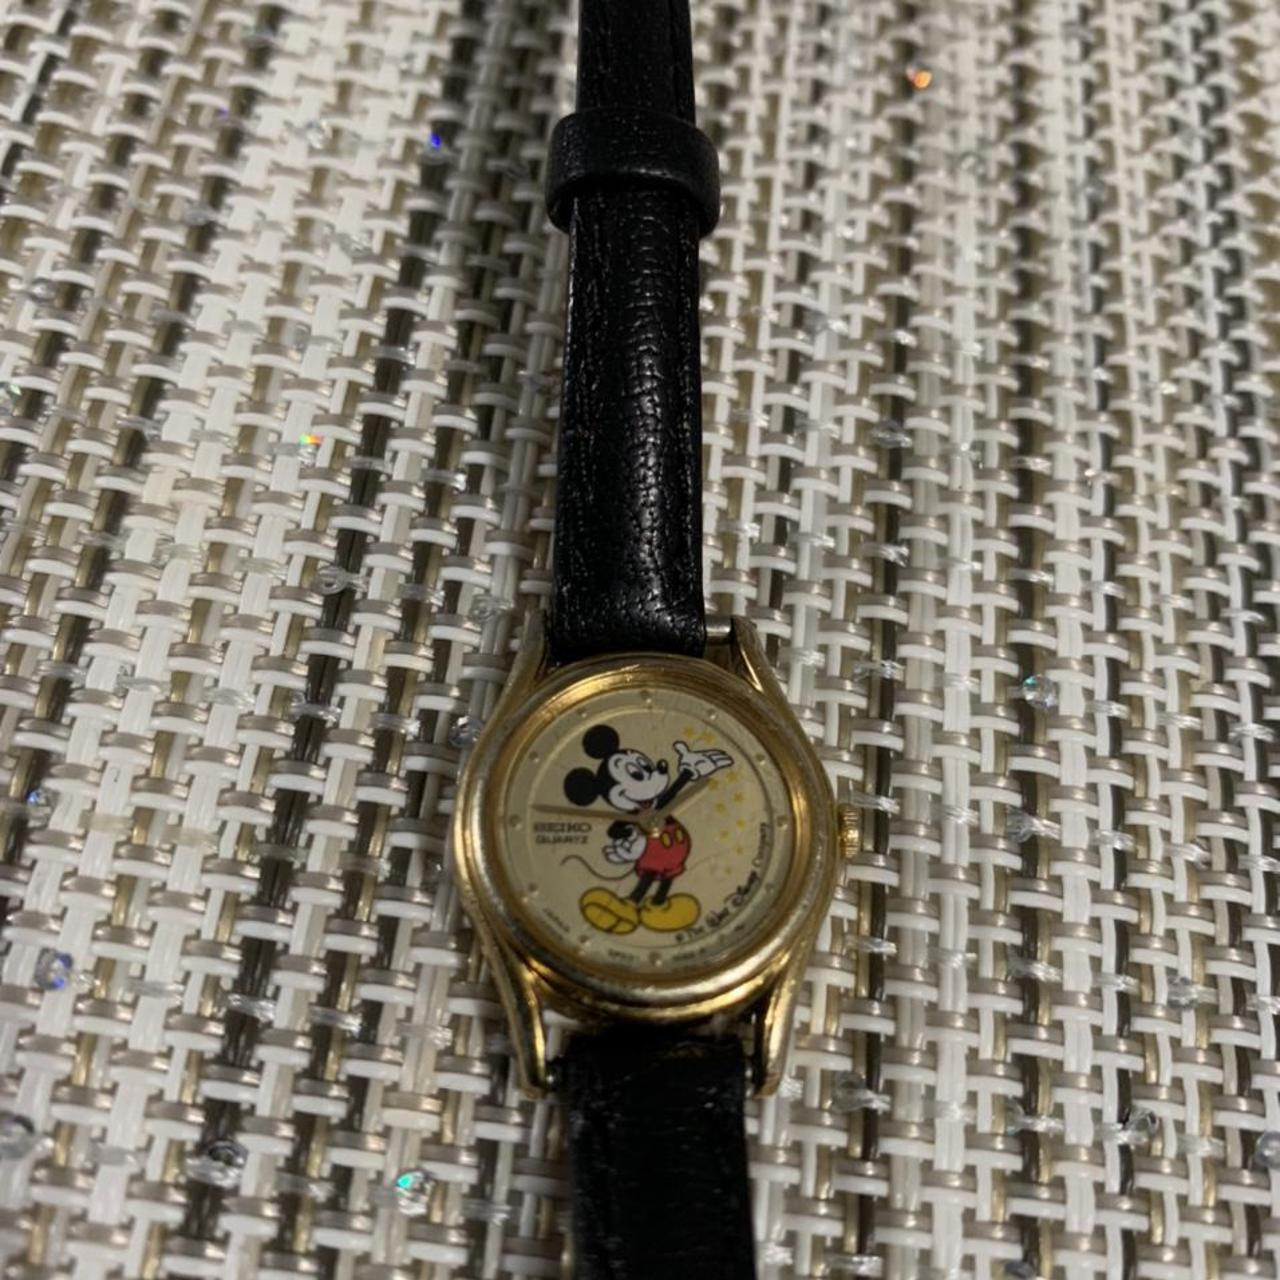 Product Image 1 - Vintage Seiko Mickey Mouse watch.

Good